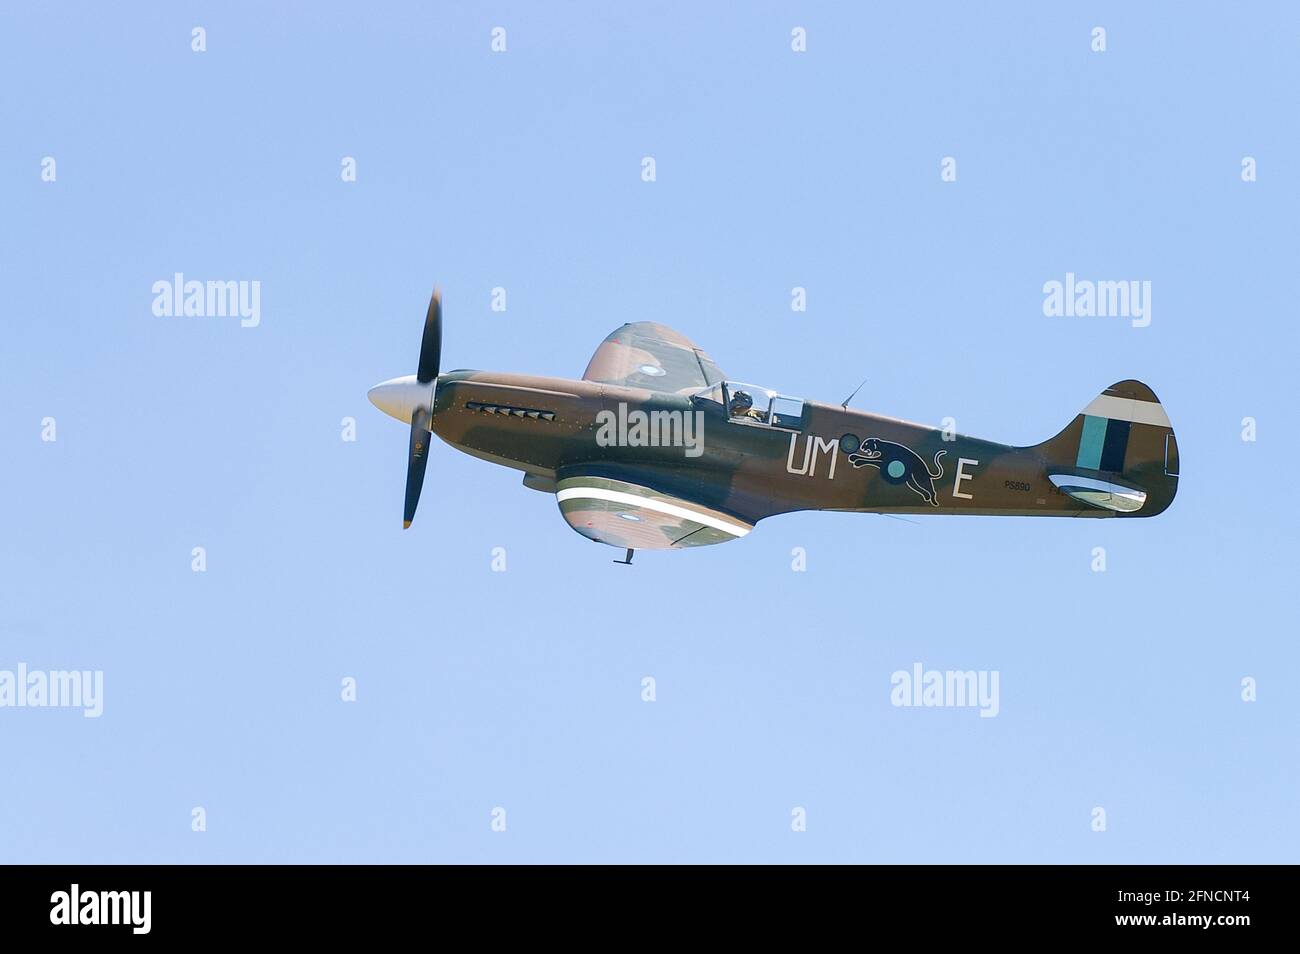 Second World War Vickers Supermarine Spitfire Mk.XIX fighter plane PS890 flying at Duxford, UK, in blue sky Stock Photo